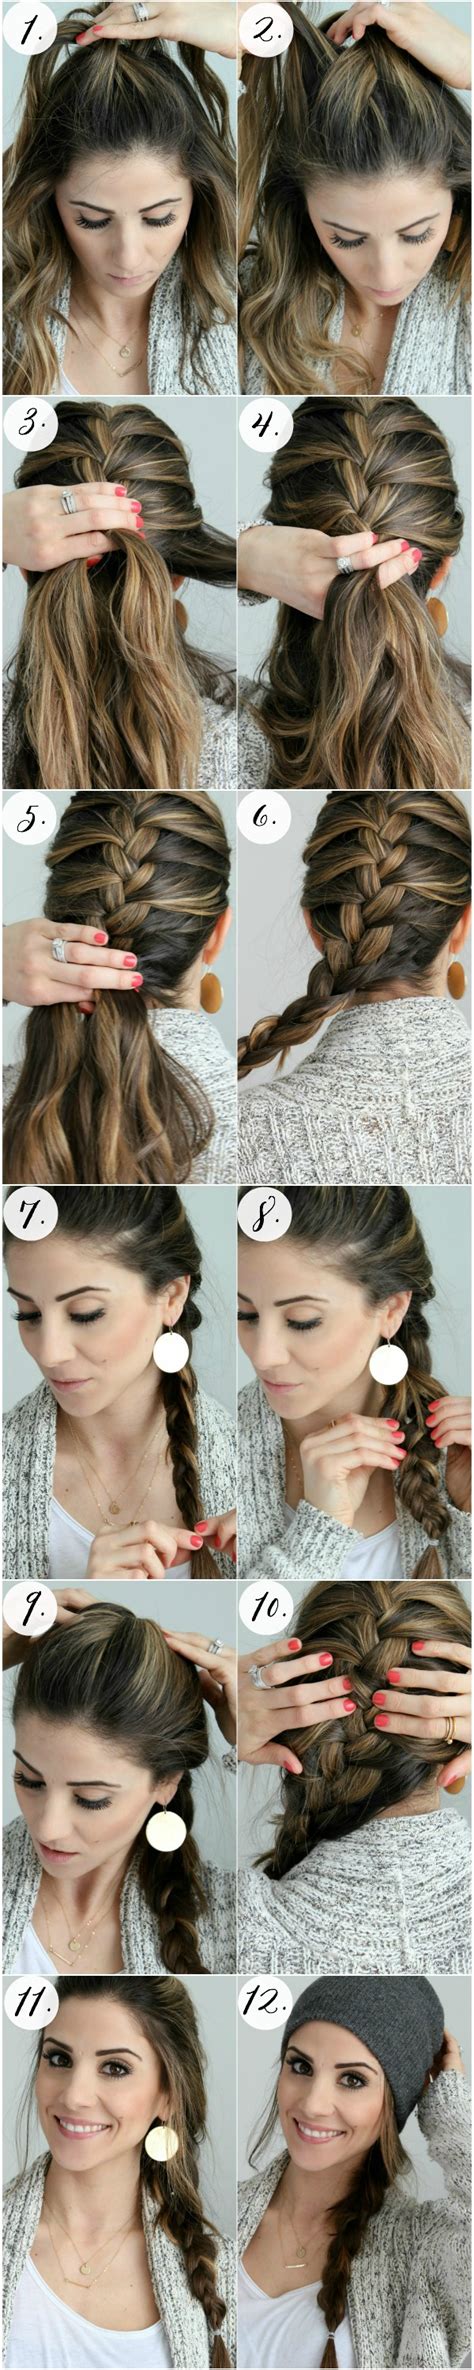 This french braid your hair in 7 simple steps post a cideo or a blog like this about how to make a french braid(suitable for short hair) for these instructions! Simple French Braid Tutorial - Lauren McBride